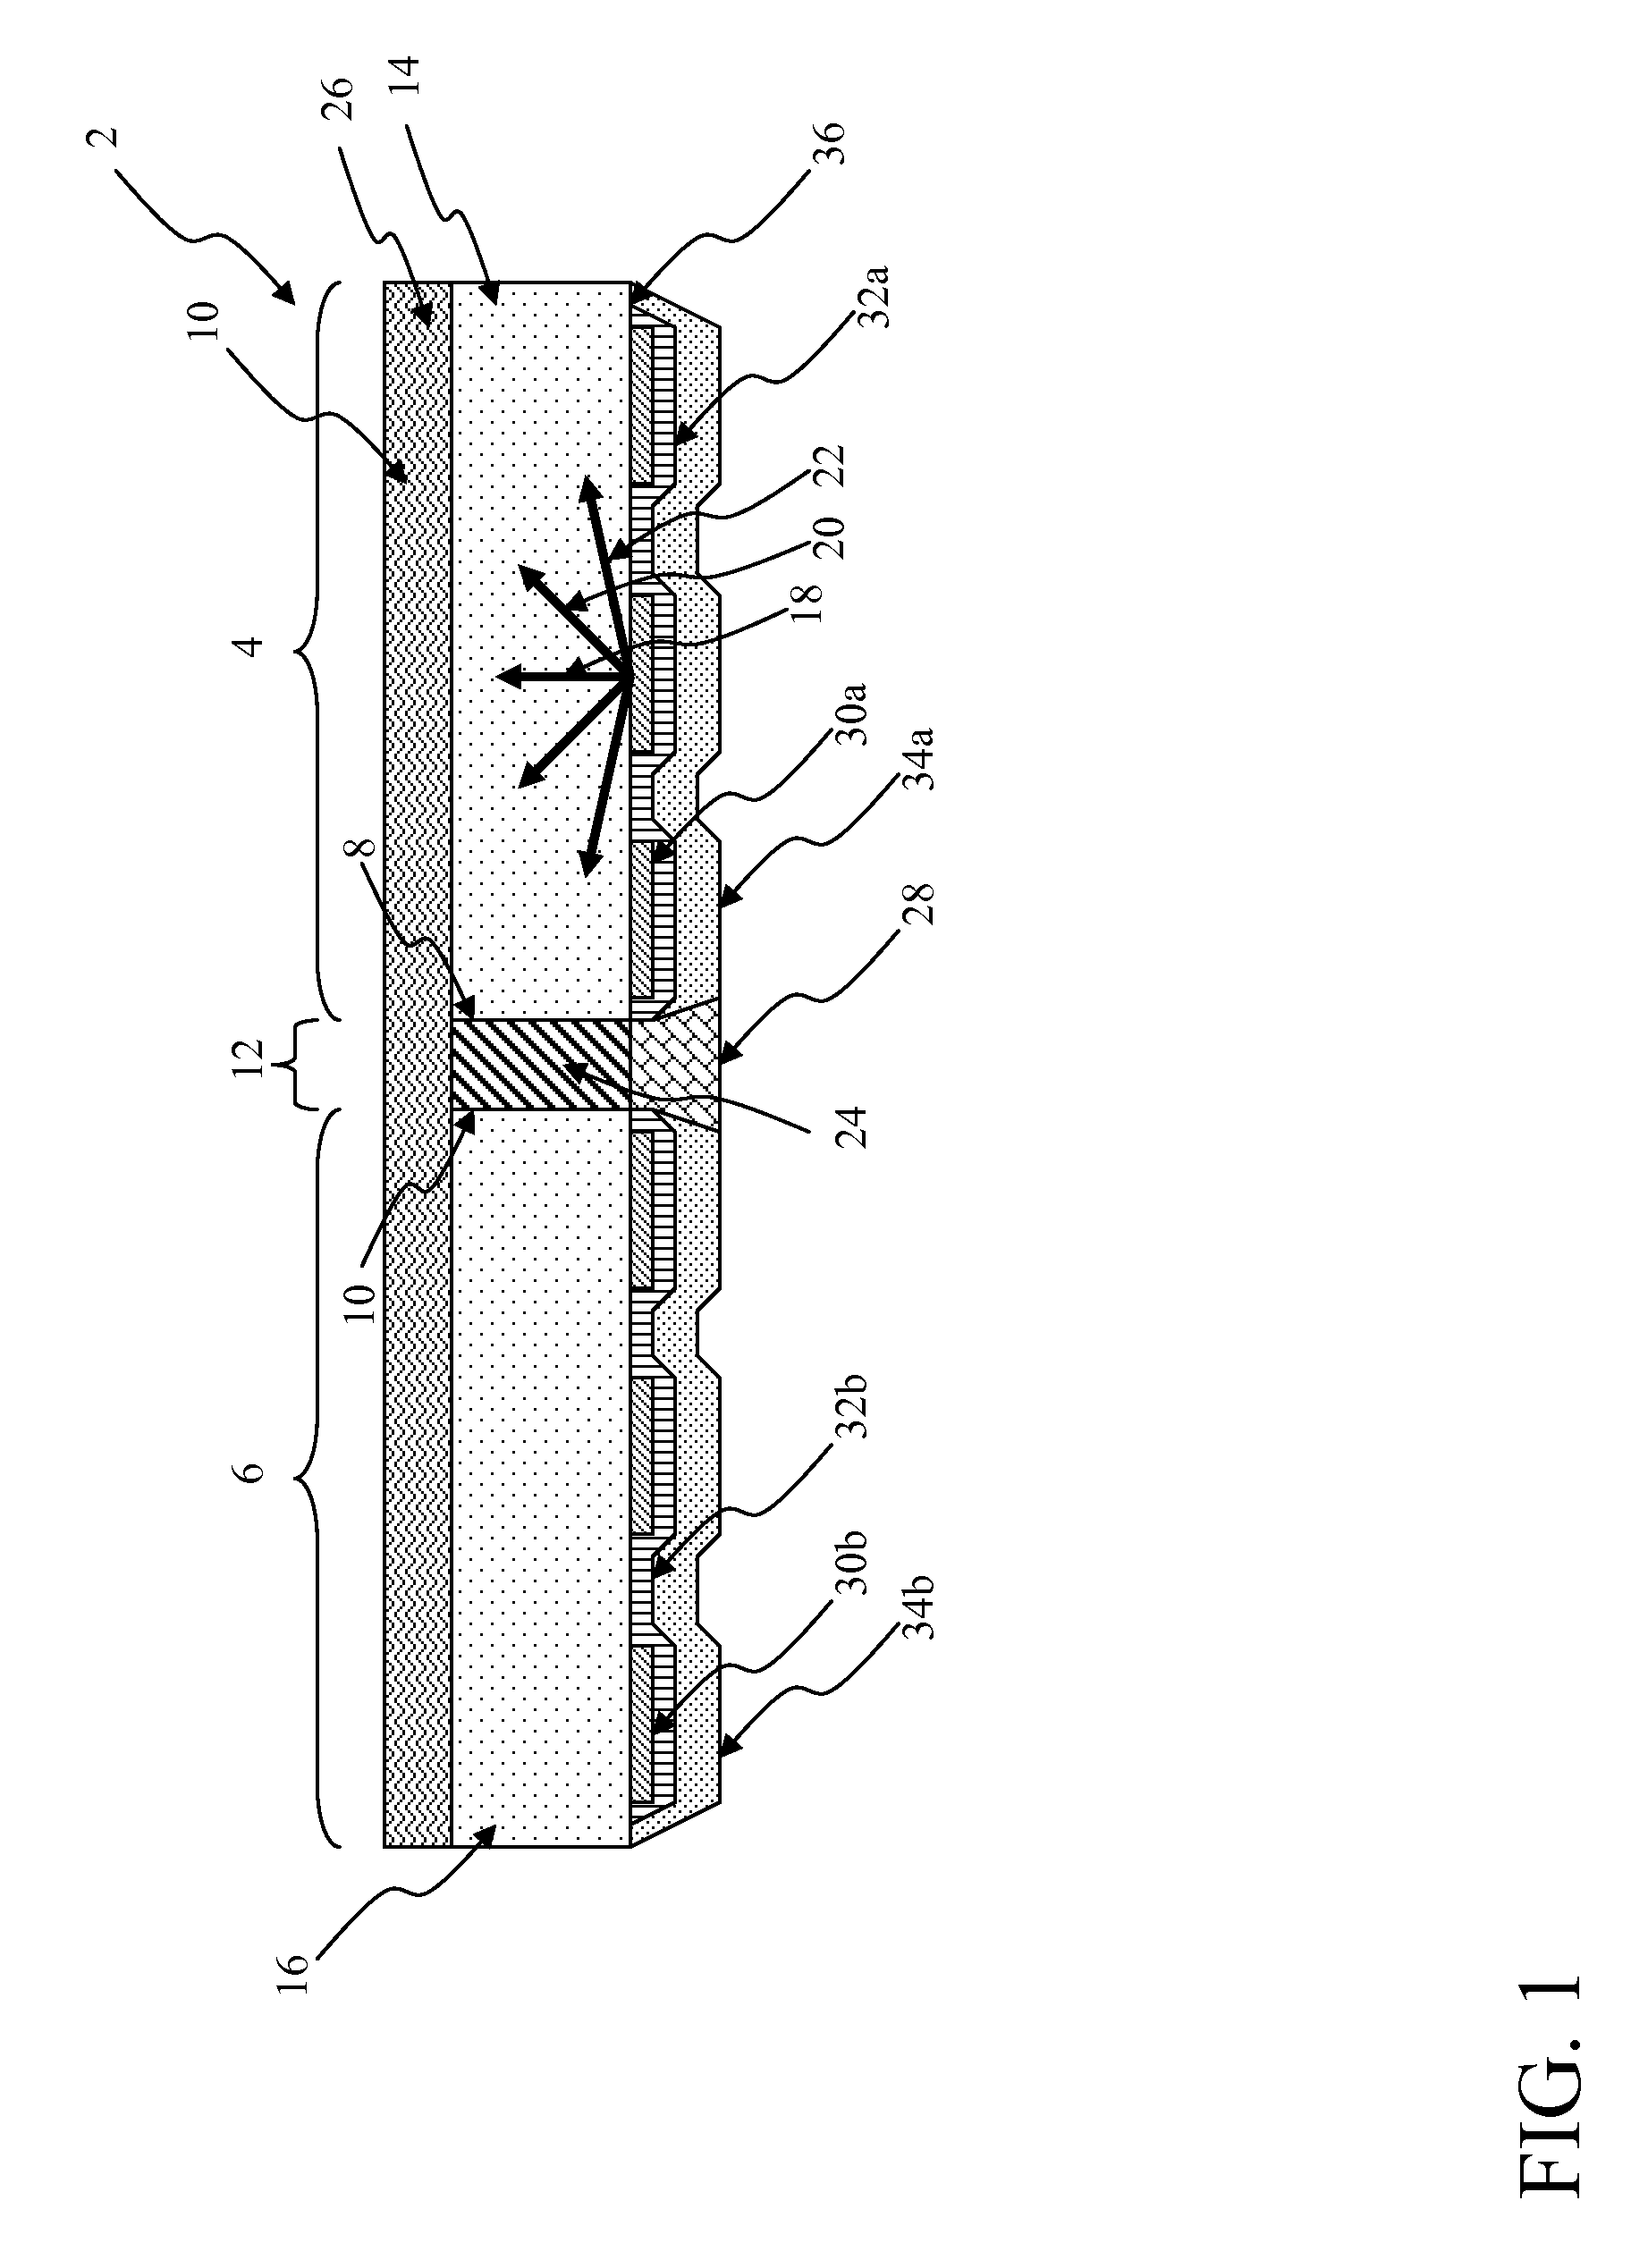 Tiled electroluminescent device with filled gaps